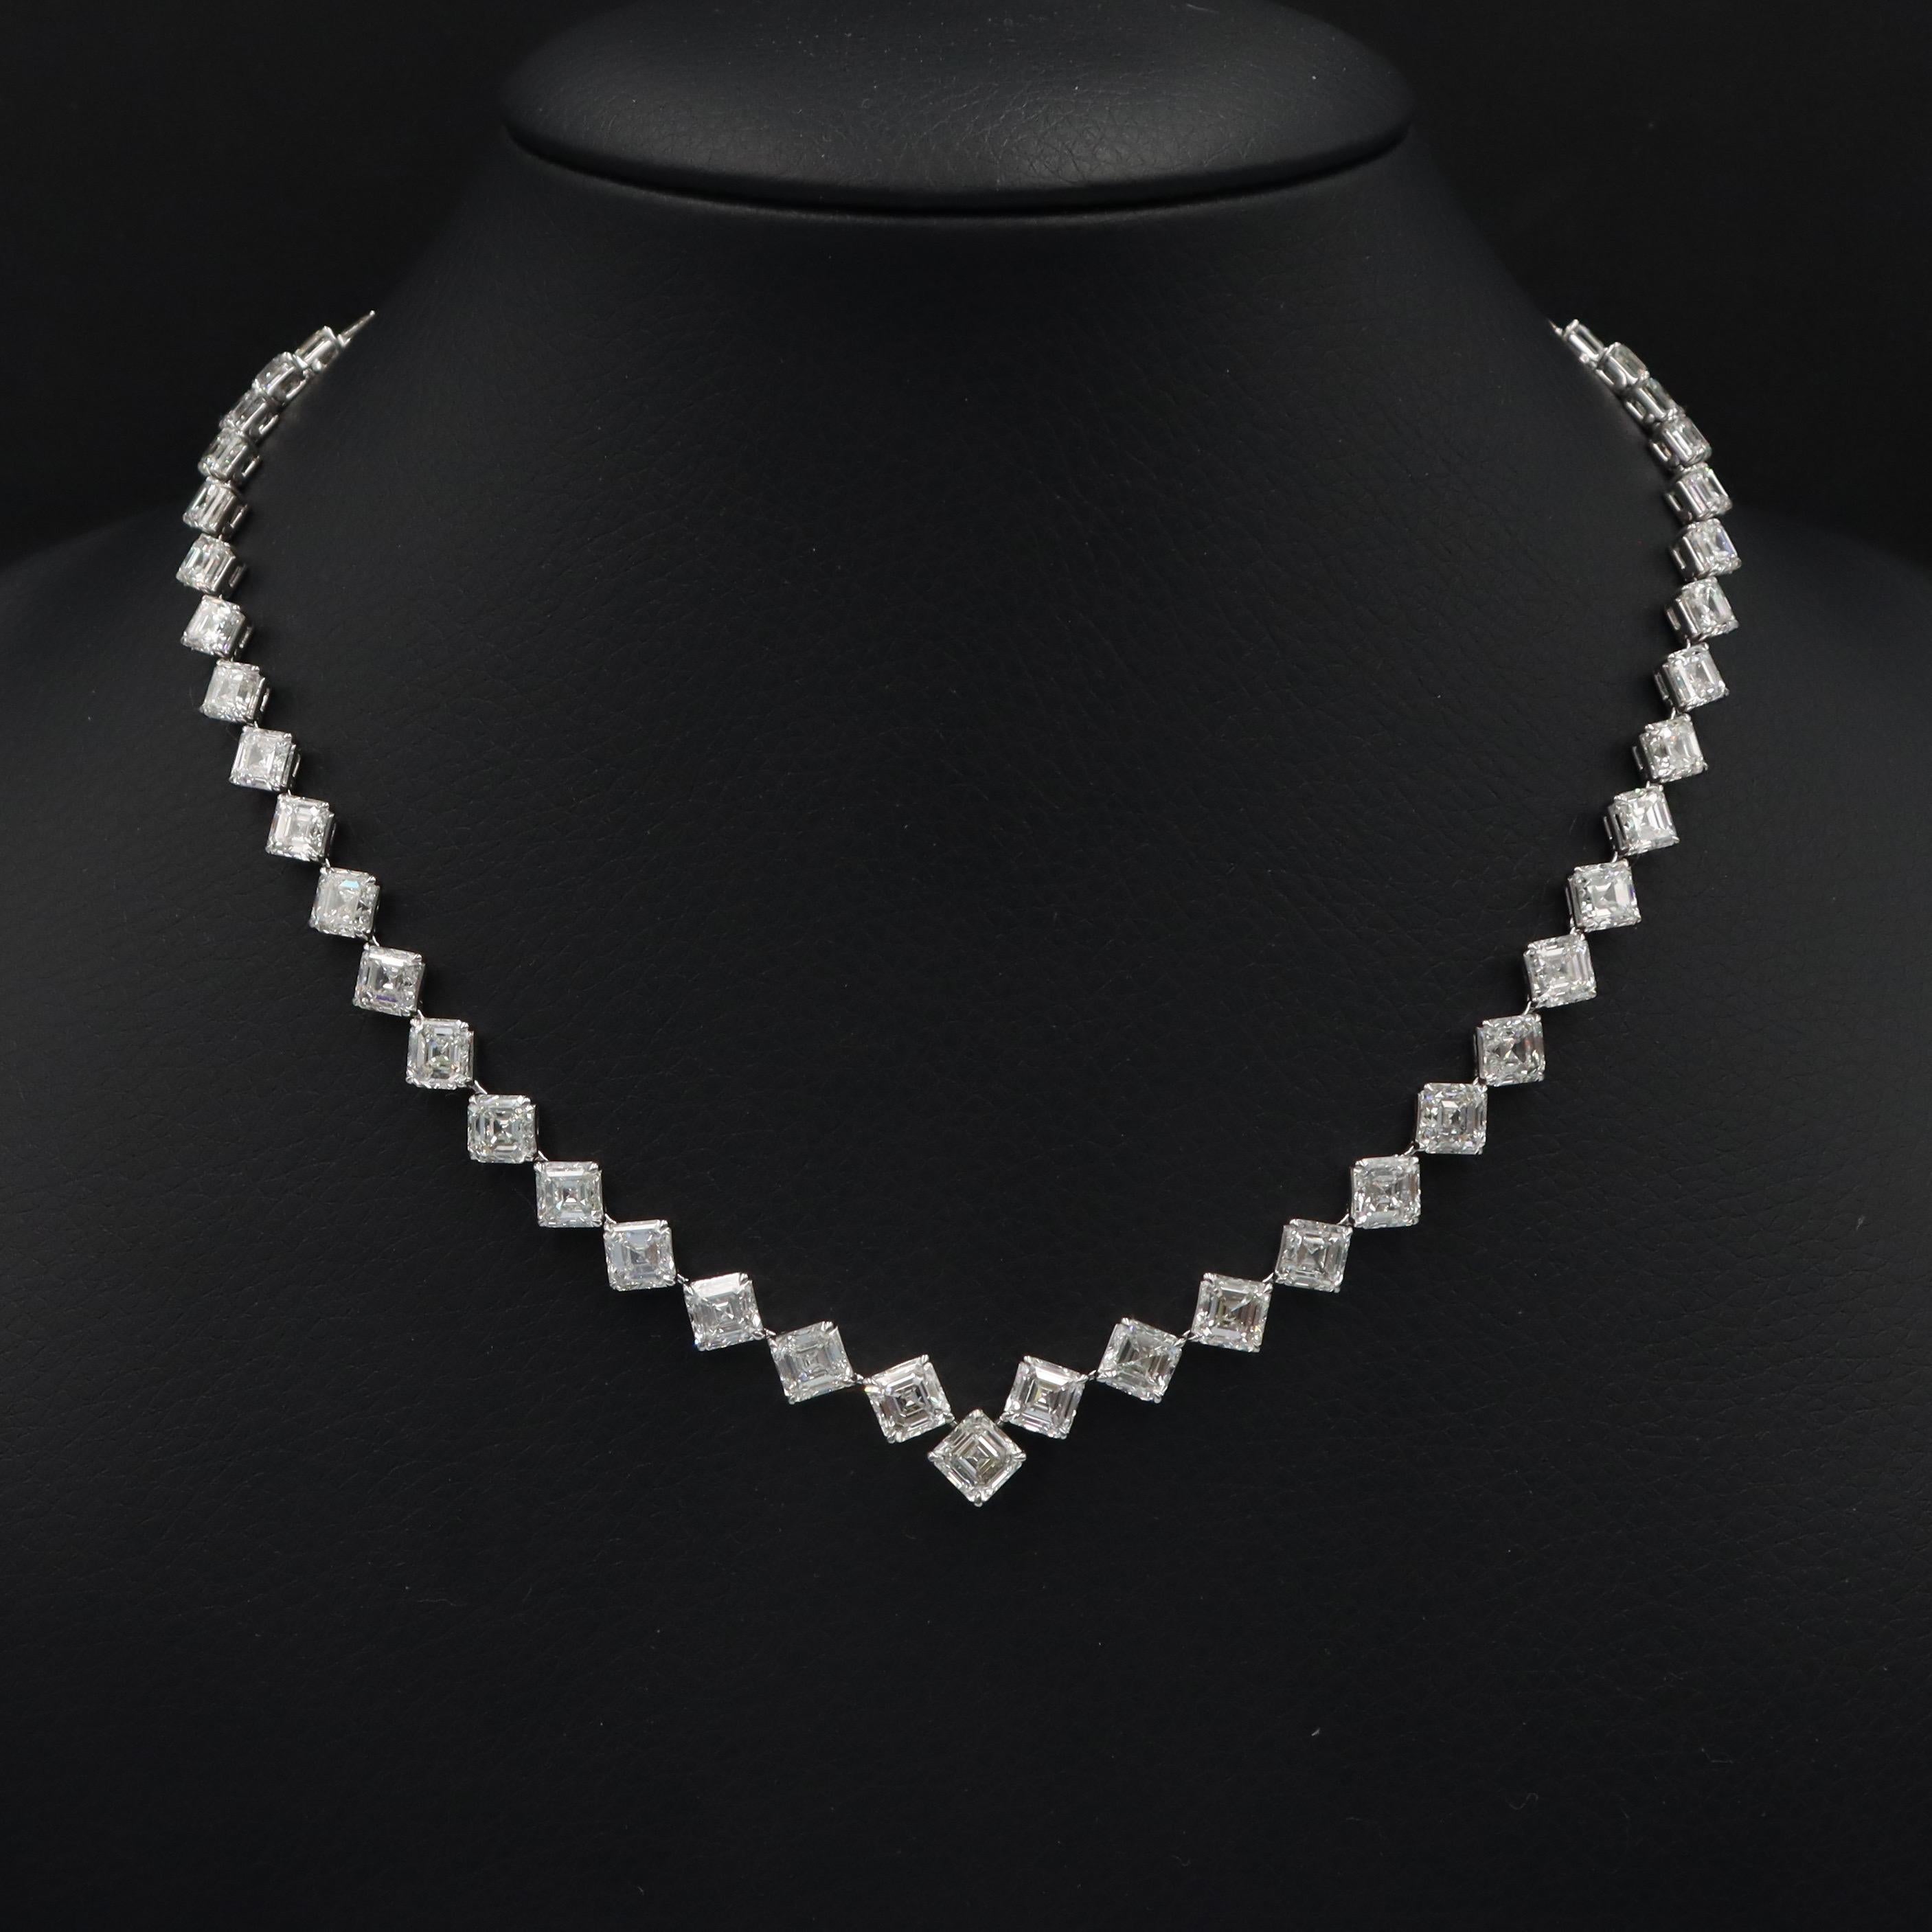 From Emilio Jewelry, a well known and respected wholesaler/dealer located on New York’s iconic Fifth Avenue, 
Featuring a custom hand made necklace that sits perfectly! Every single Asscher Cut diamond is Gia certified natural. The diamonds are 1.00